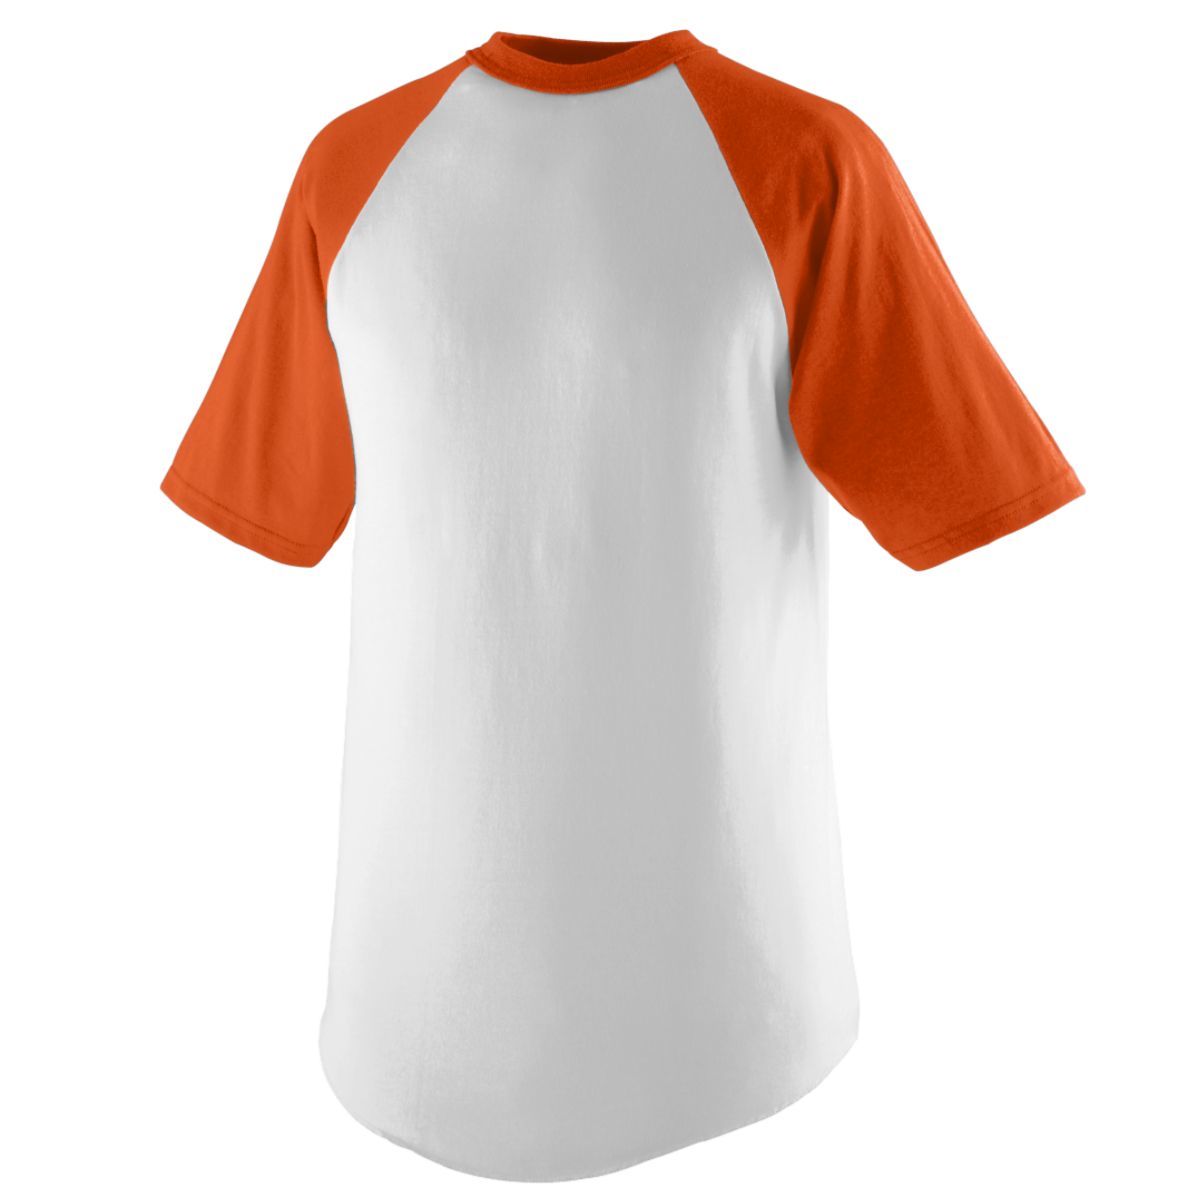 Augusta Sportswear Youth Short Sleeve Baseball Jersey in White/Orange  -Part of the Youth, Youth-Jersey, Augusta-Products, Baseball, Shirts, All-Sports, All-Sports-1 product lines at KanaleyCreations.com